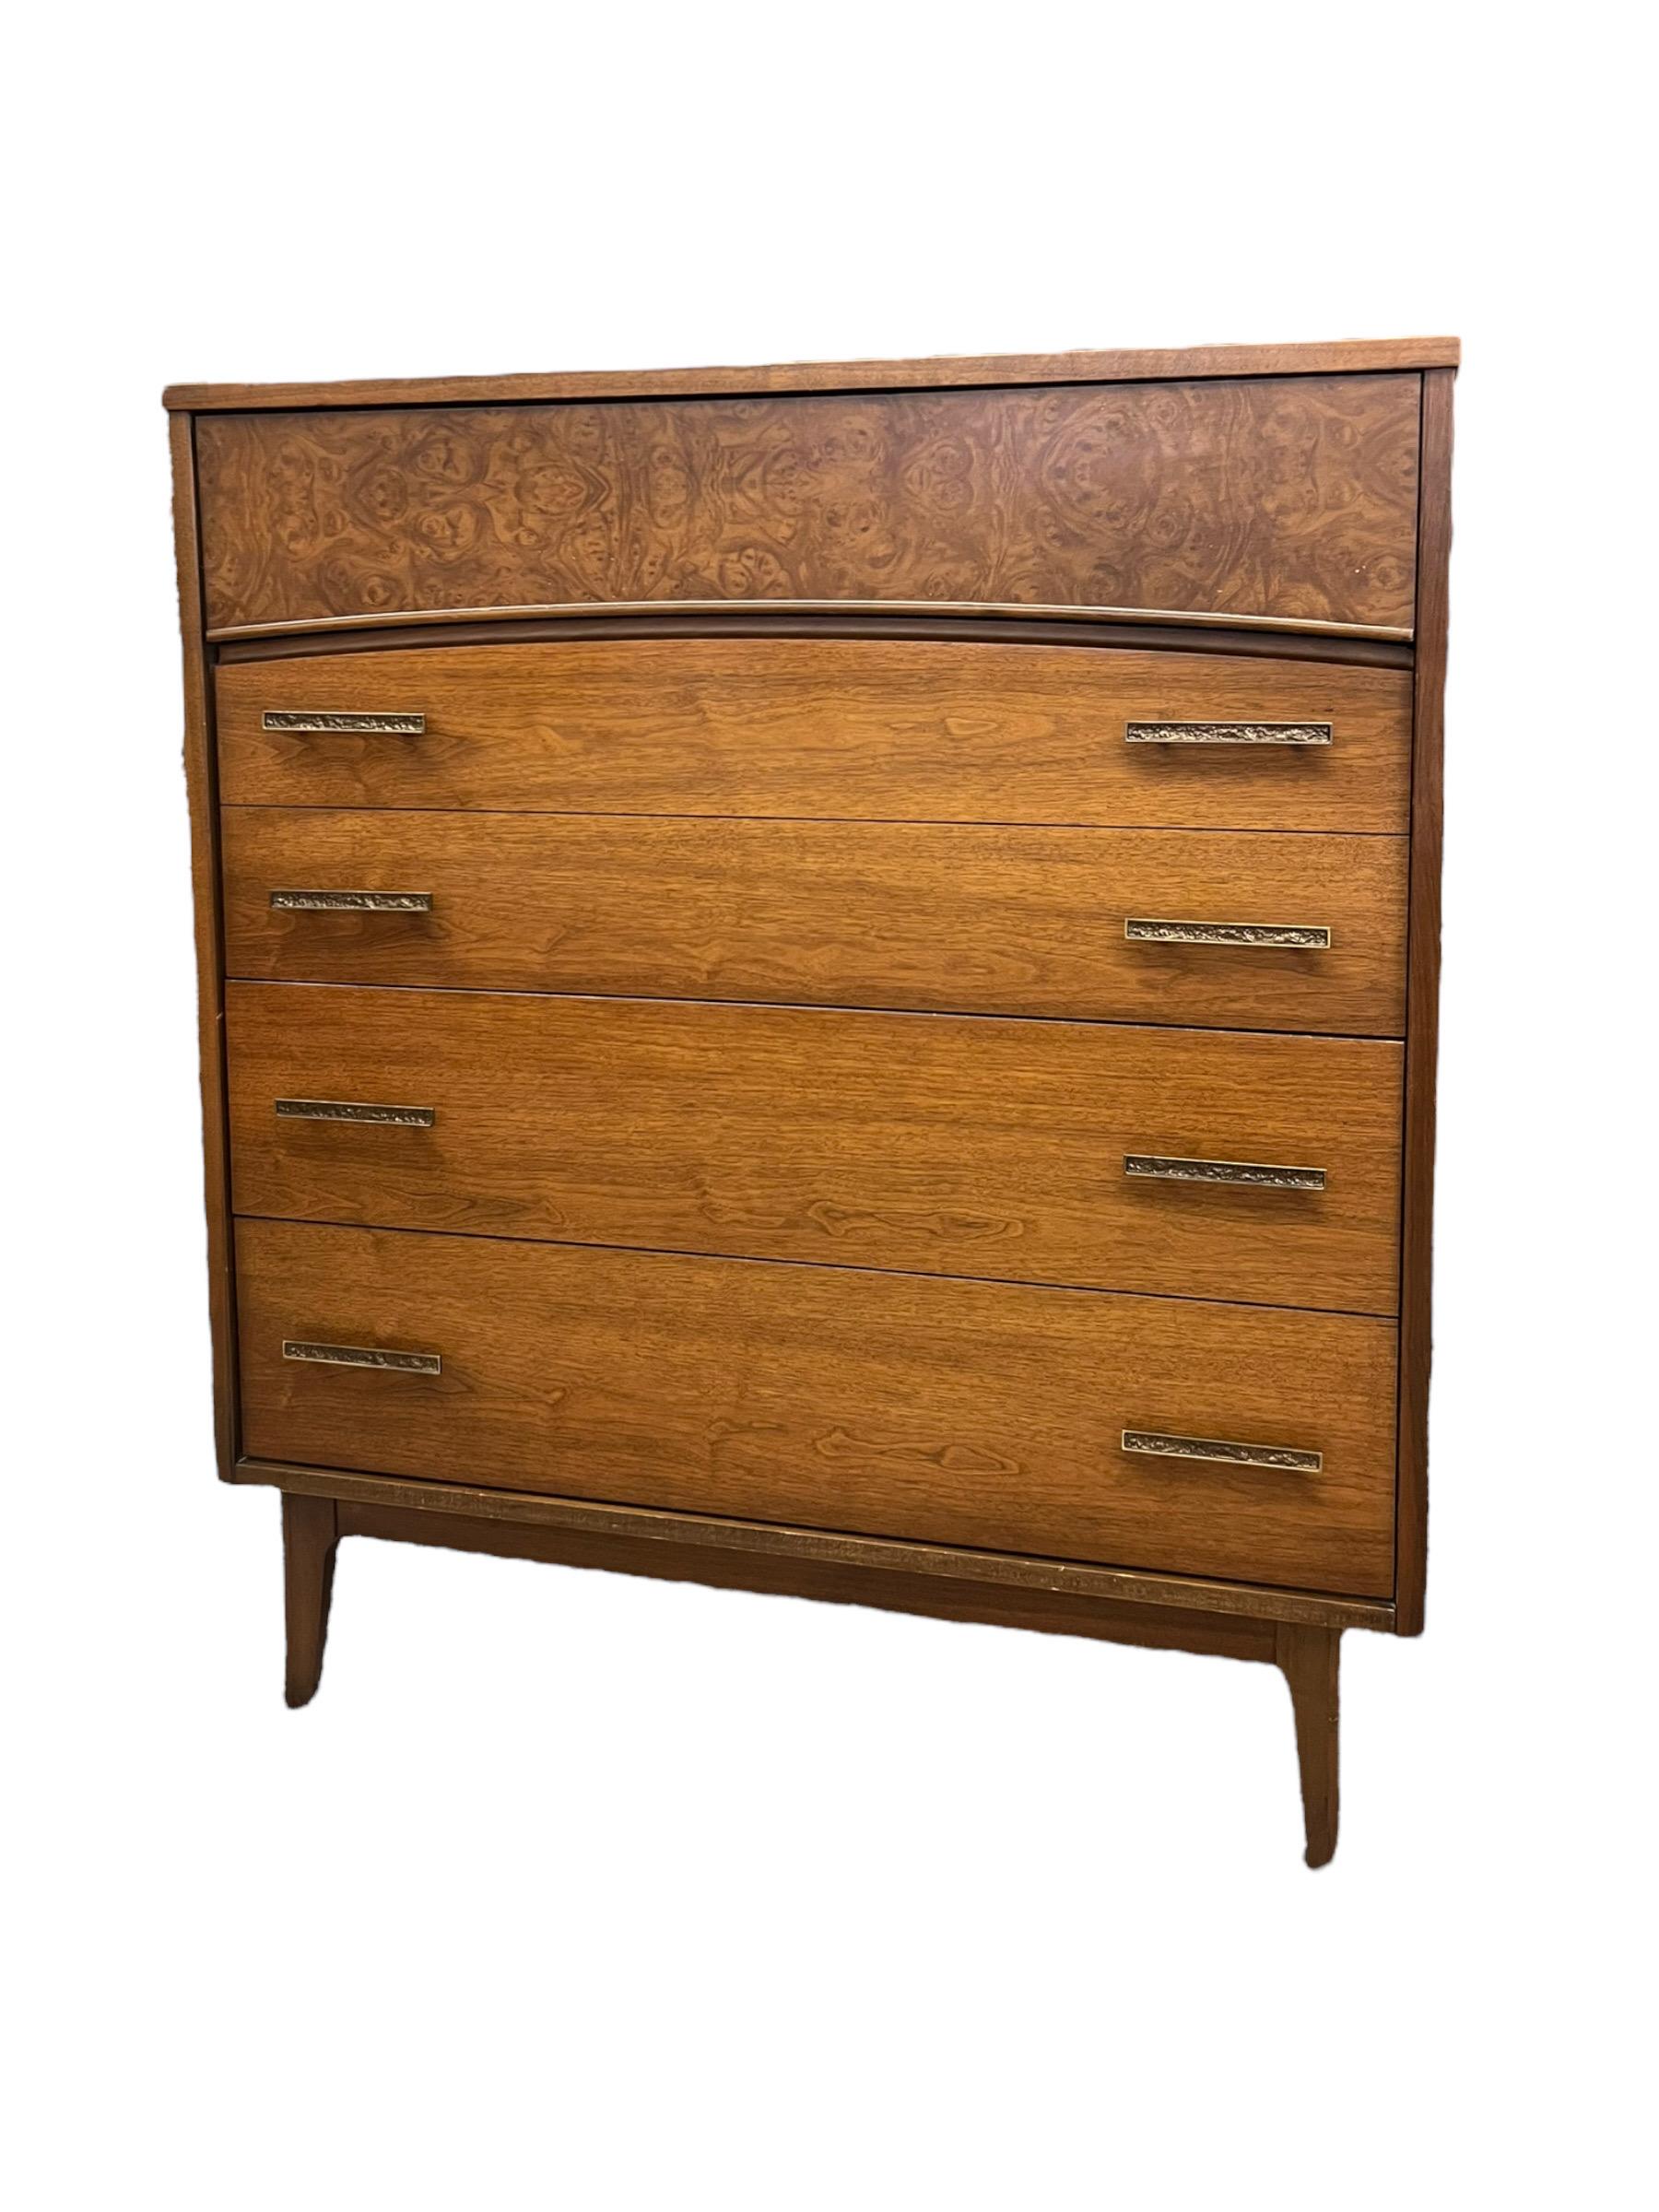 Beautiful Walnut Dresser. In great condition and smooth drawers. Sleek design with burl front details. A spacious and accommodating dresser. 

Dimensions :- 38